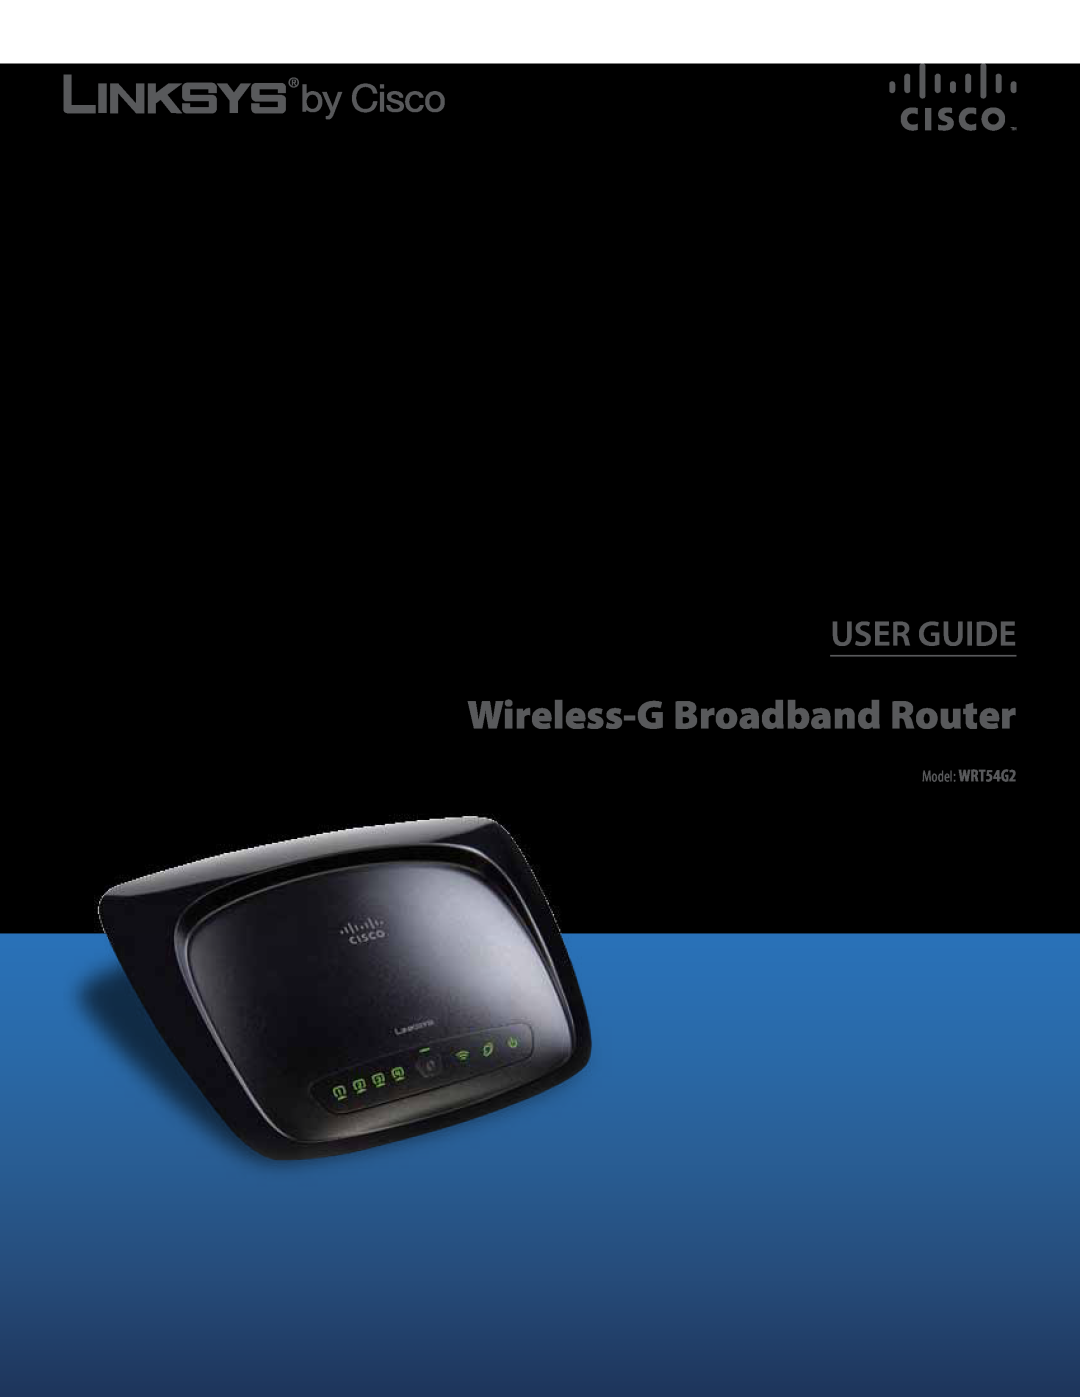 Cisco Systems manual Wireless-G Broadband Router, User Guide, Model WRT54G2 